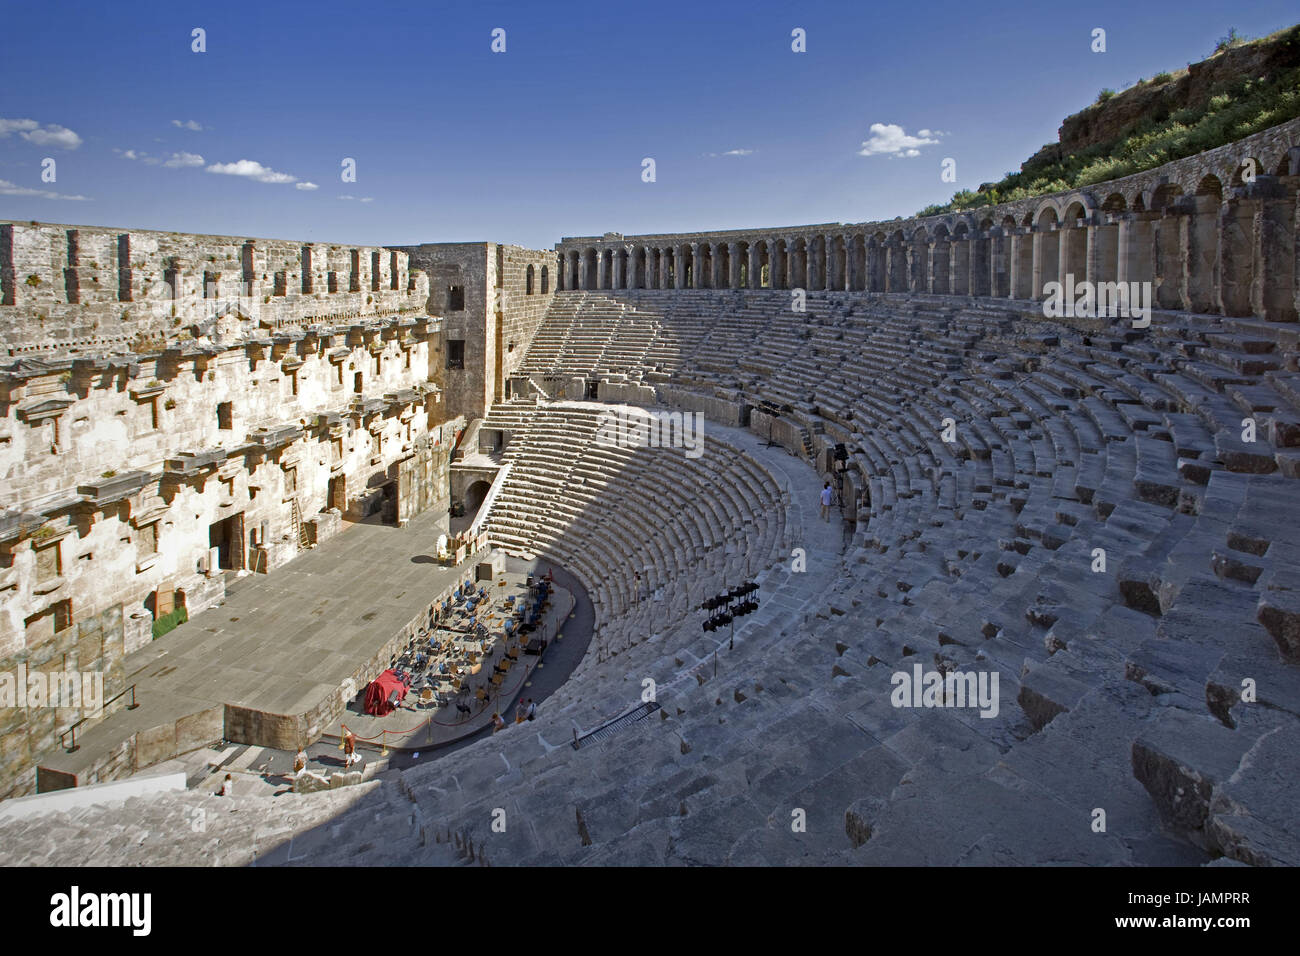 Turkey,Aspendos,amphitheatre,tourist,Mediterranean coast,ruin site,structure,theatre,remains,historically,old,antique,architecture,culture,place of interest,person,visitor,sightseeing,destination,tourism,film set,stage,spectator's stand,ranks, Stock Photo